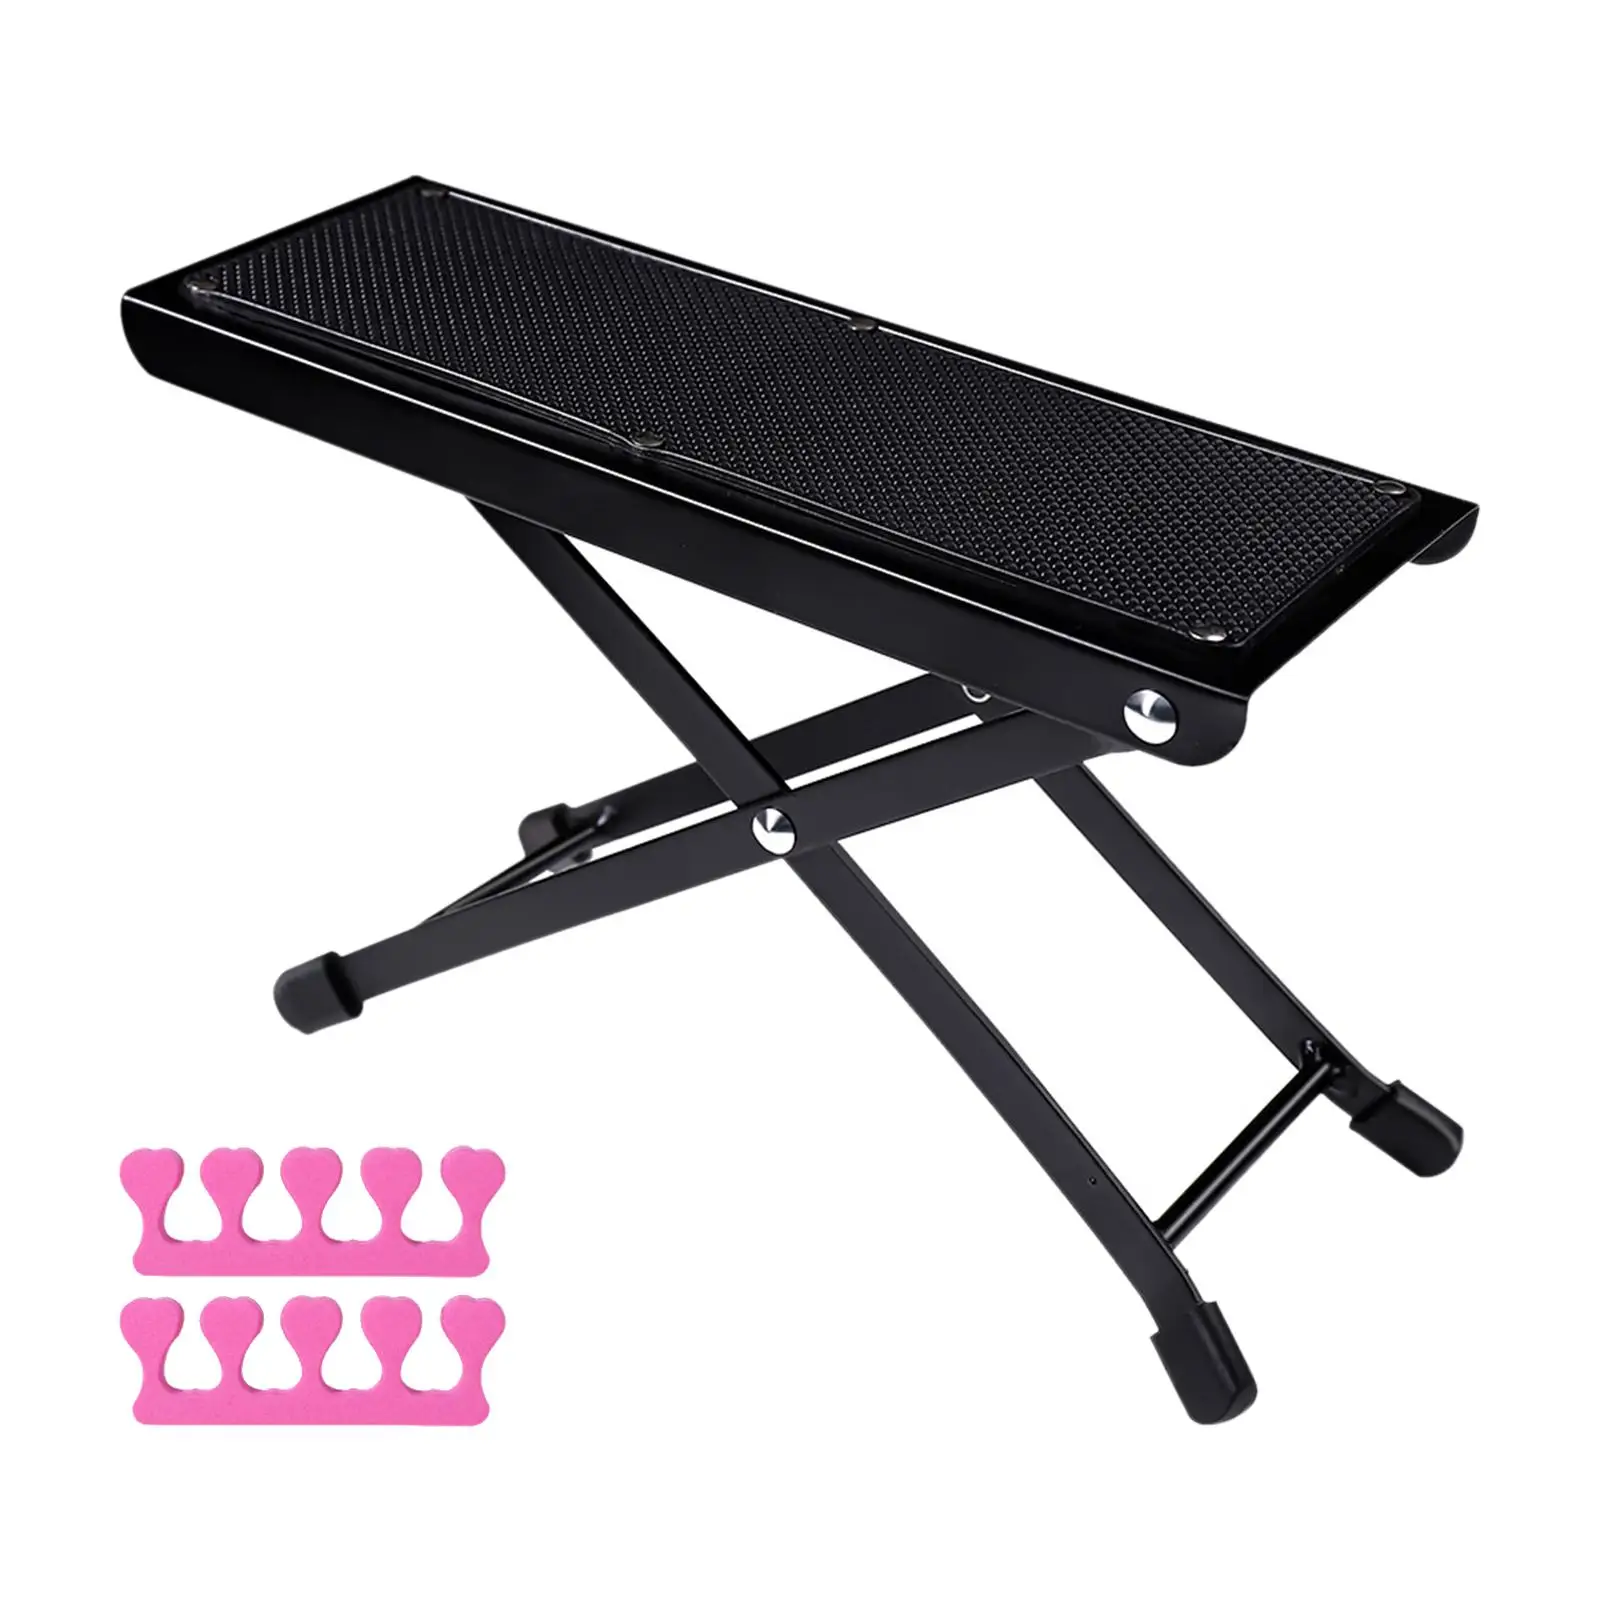 Pedicure Foot Rest, Guitar Foot Rest, Non Slip Durable Nail Pedal Adjustable Angles Toenails Rest Cushion for Nail Technician